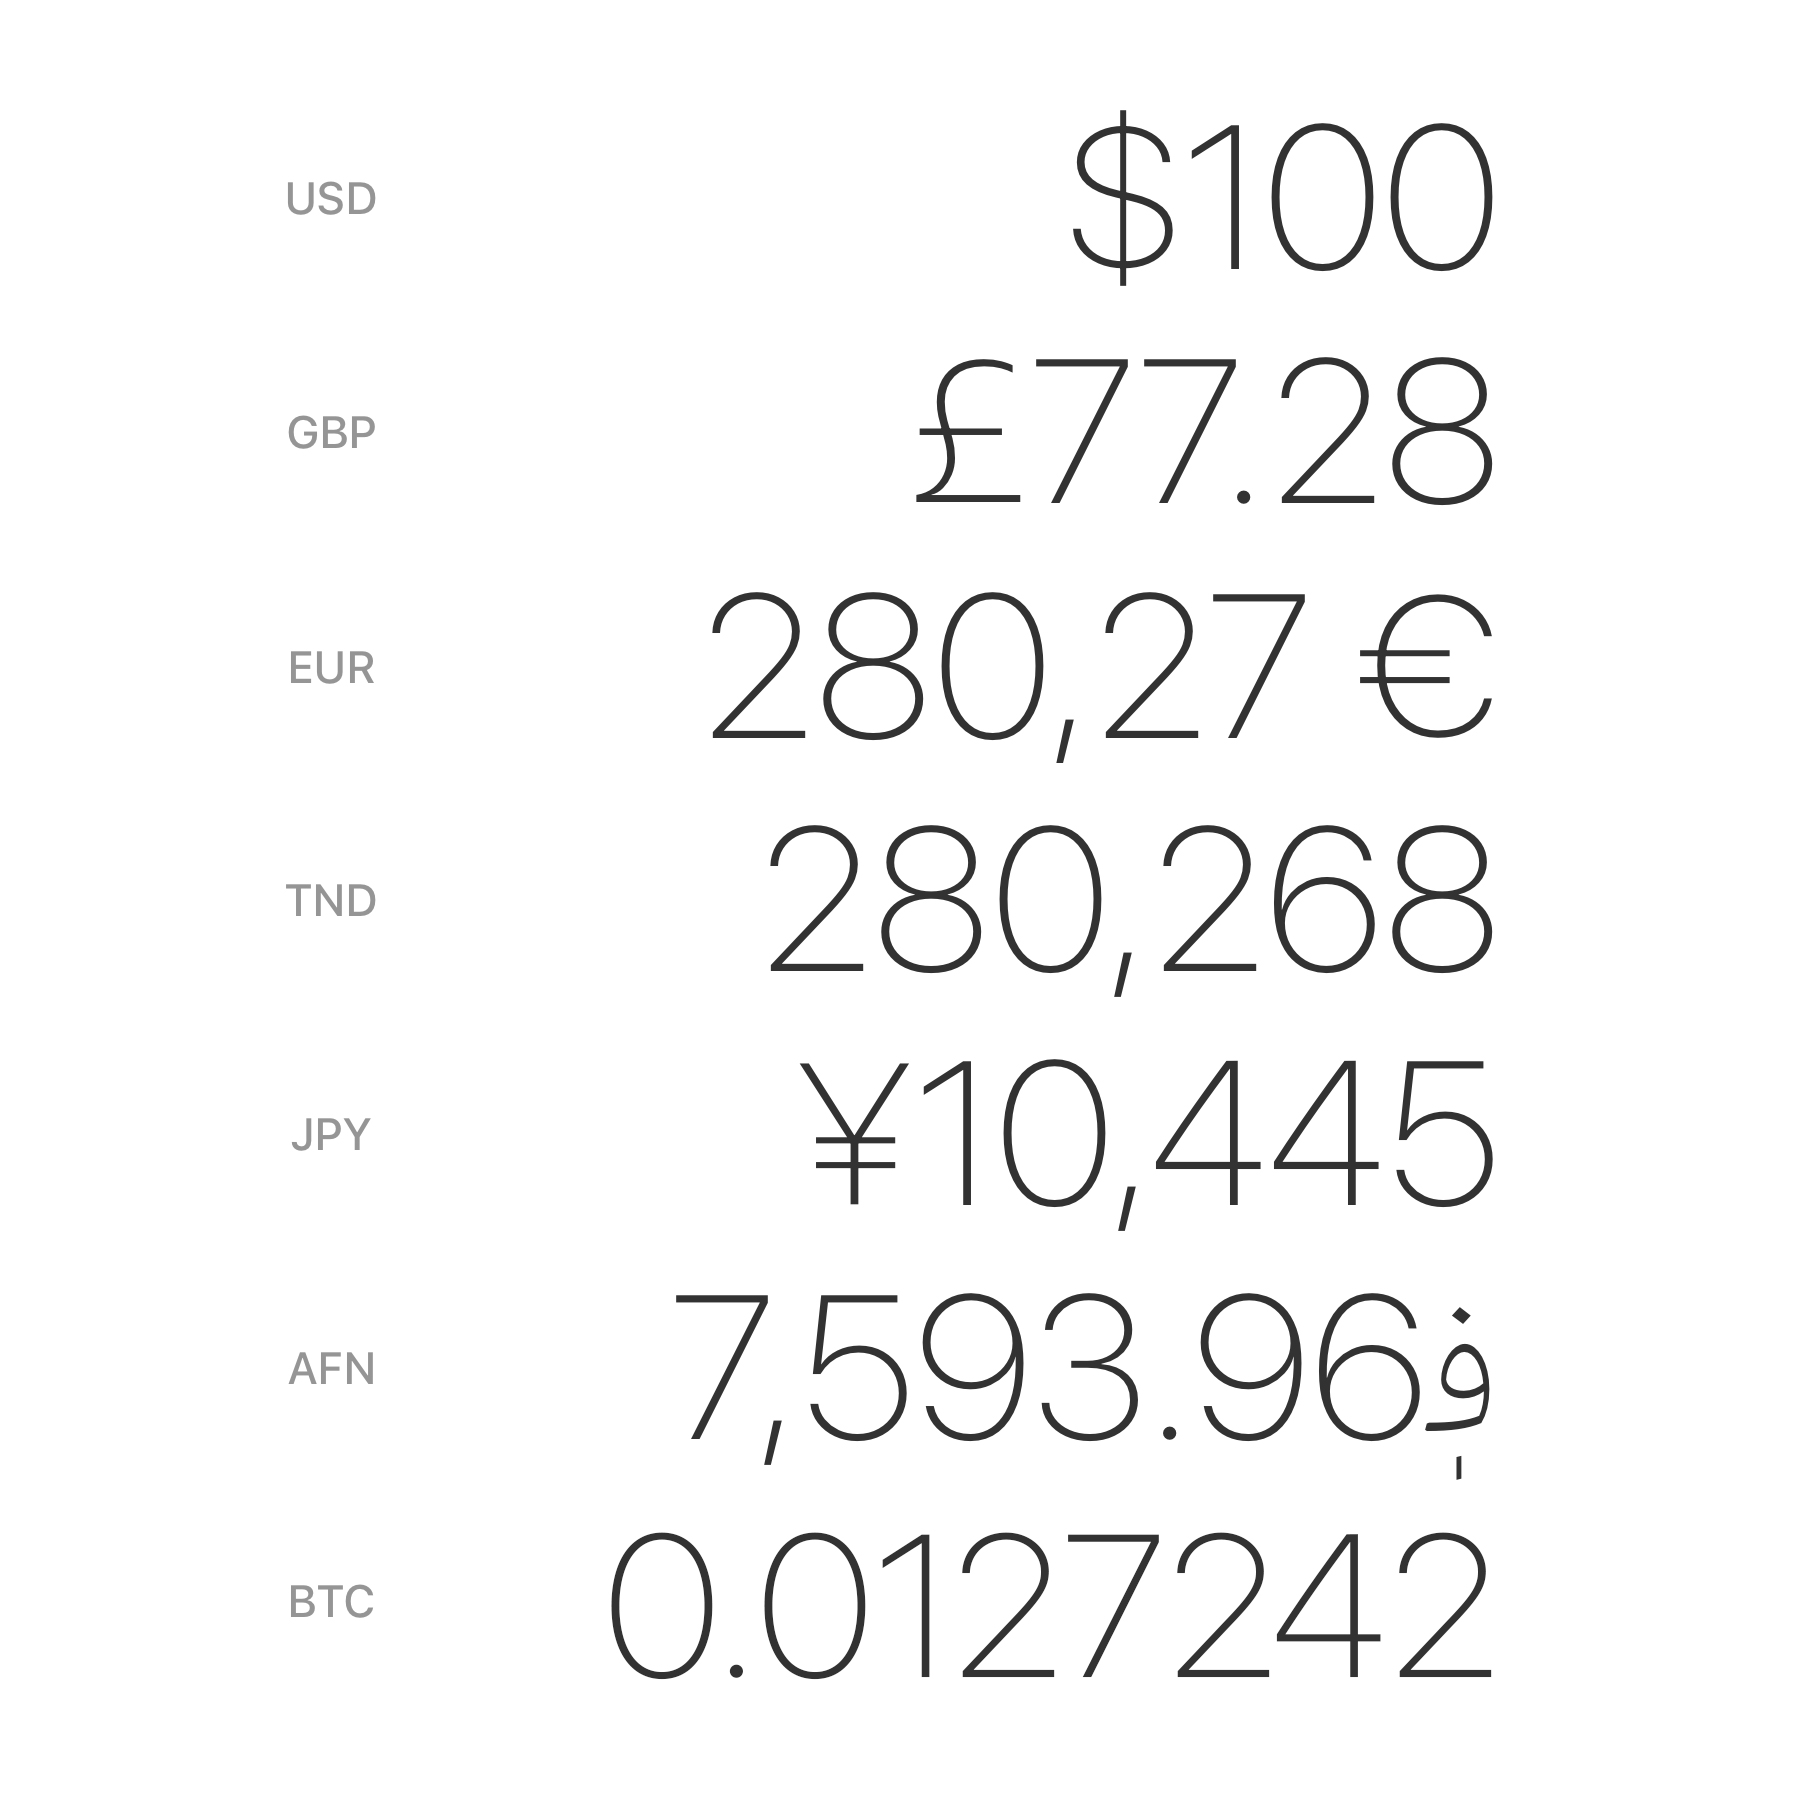 Examples of how different currencies are formatted